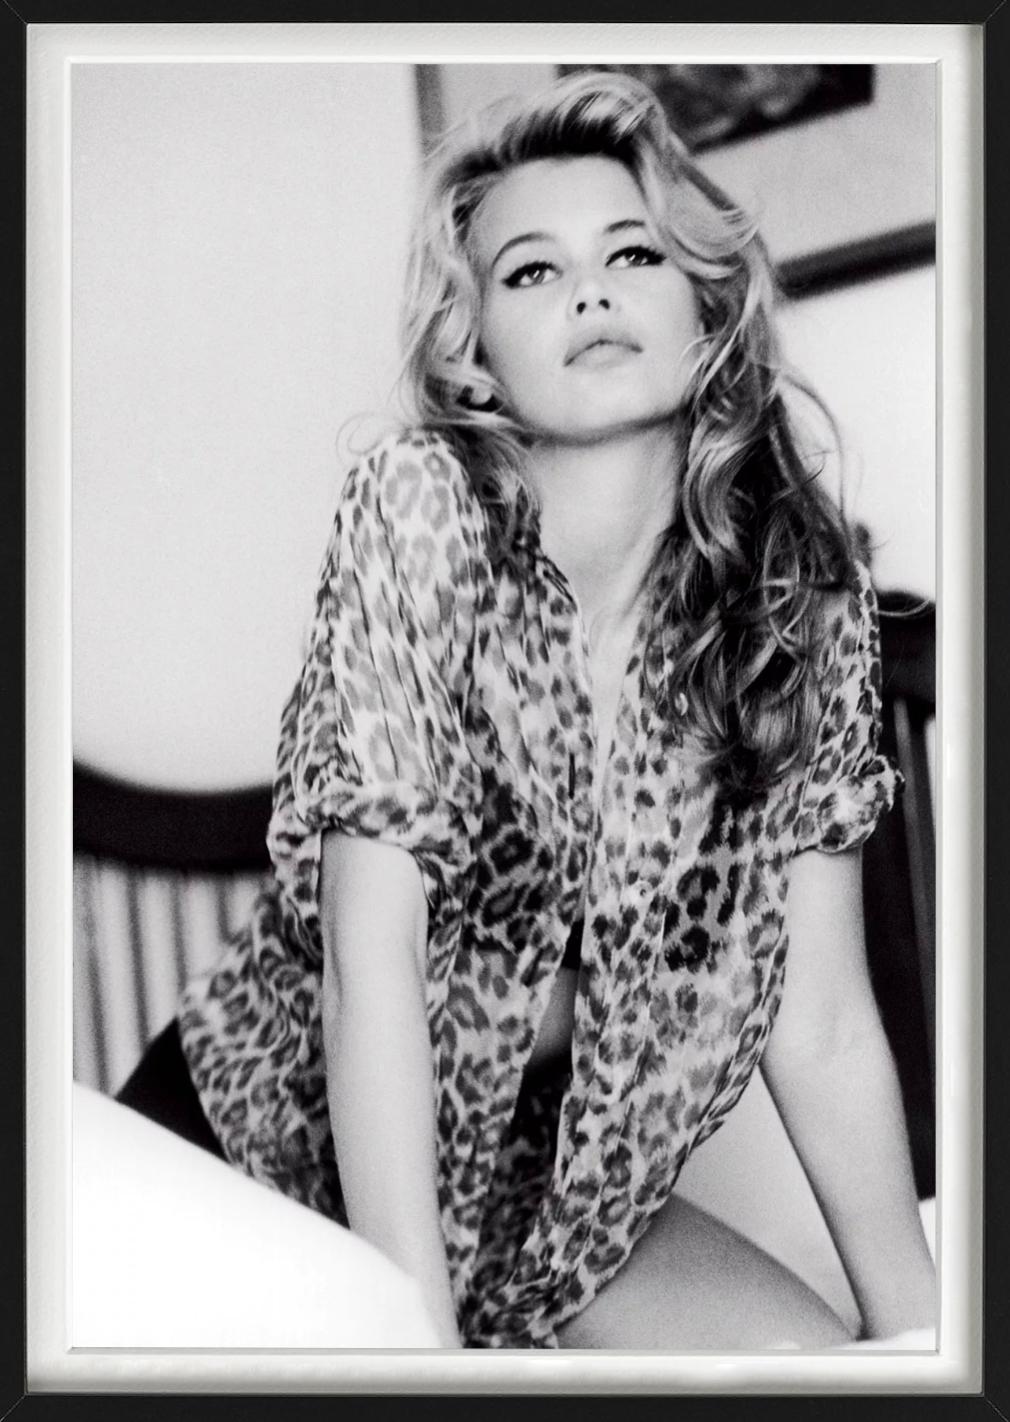 Claudia Schiffer for Guess - Model in Leopard Print, Fine Art Photography, 1989 For Sale 7